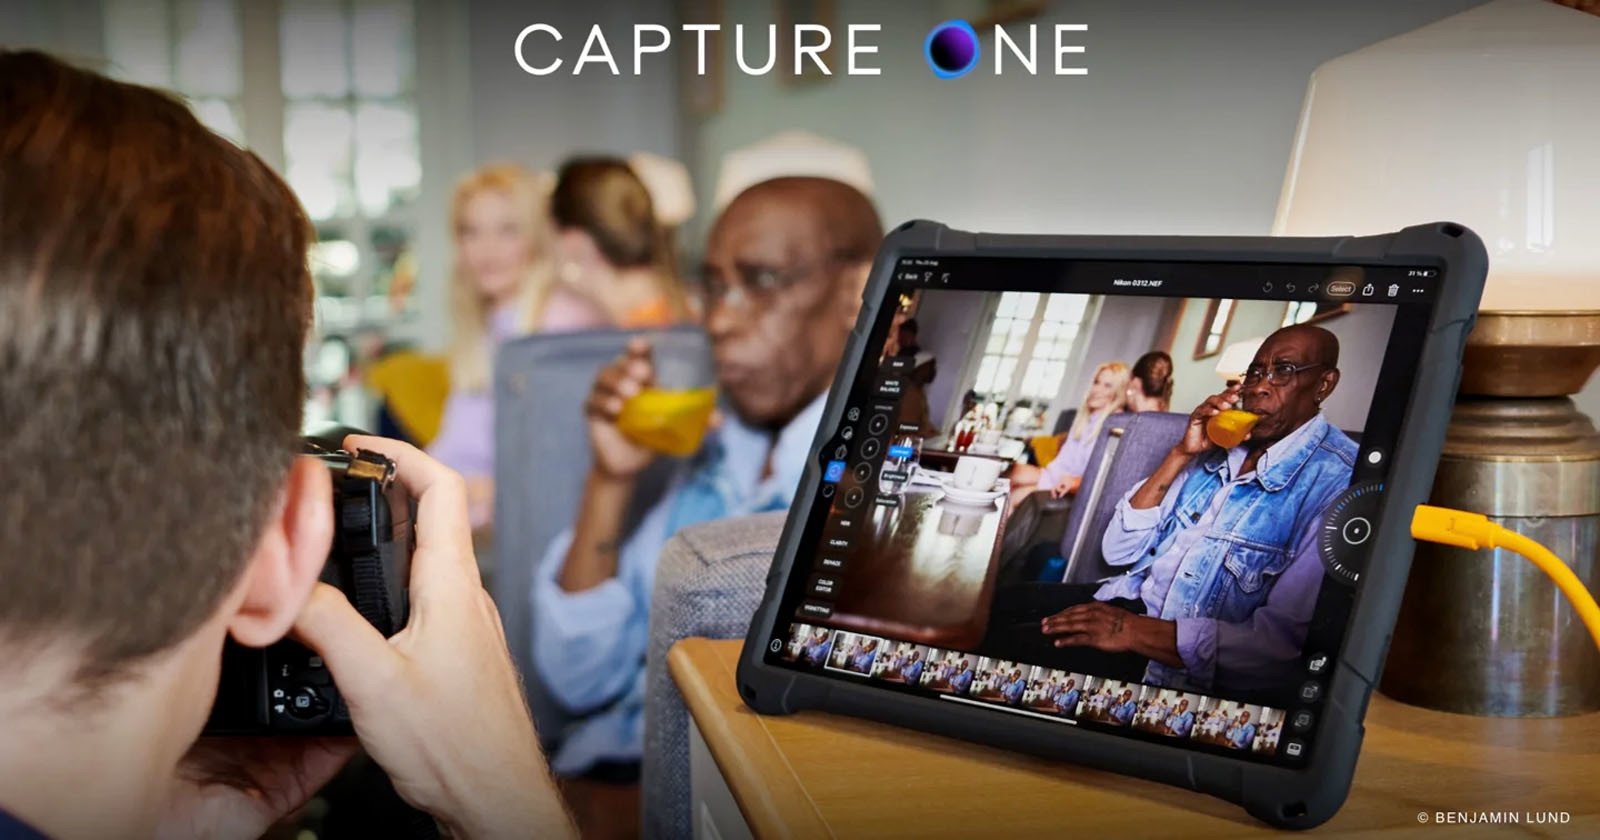 Capture One Adds Wired or Wireless Tethering Capability to its iPad App